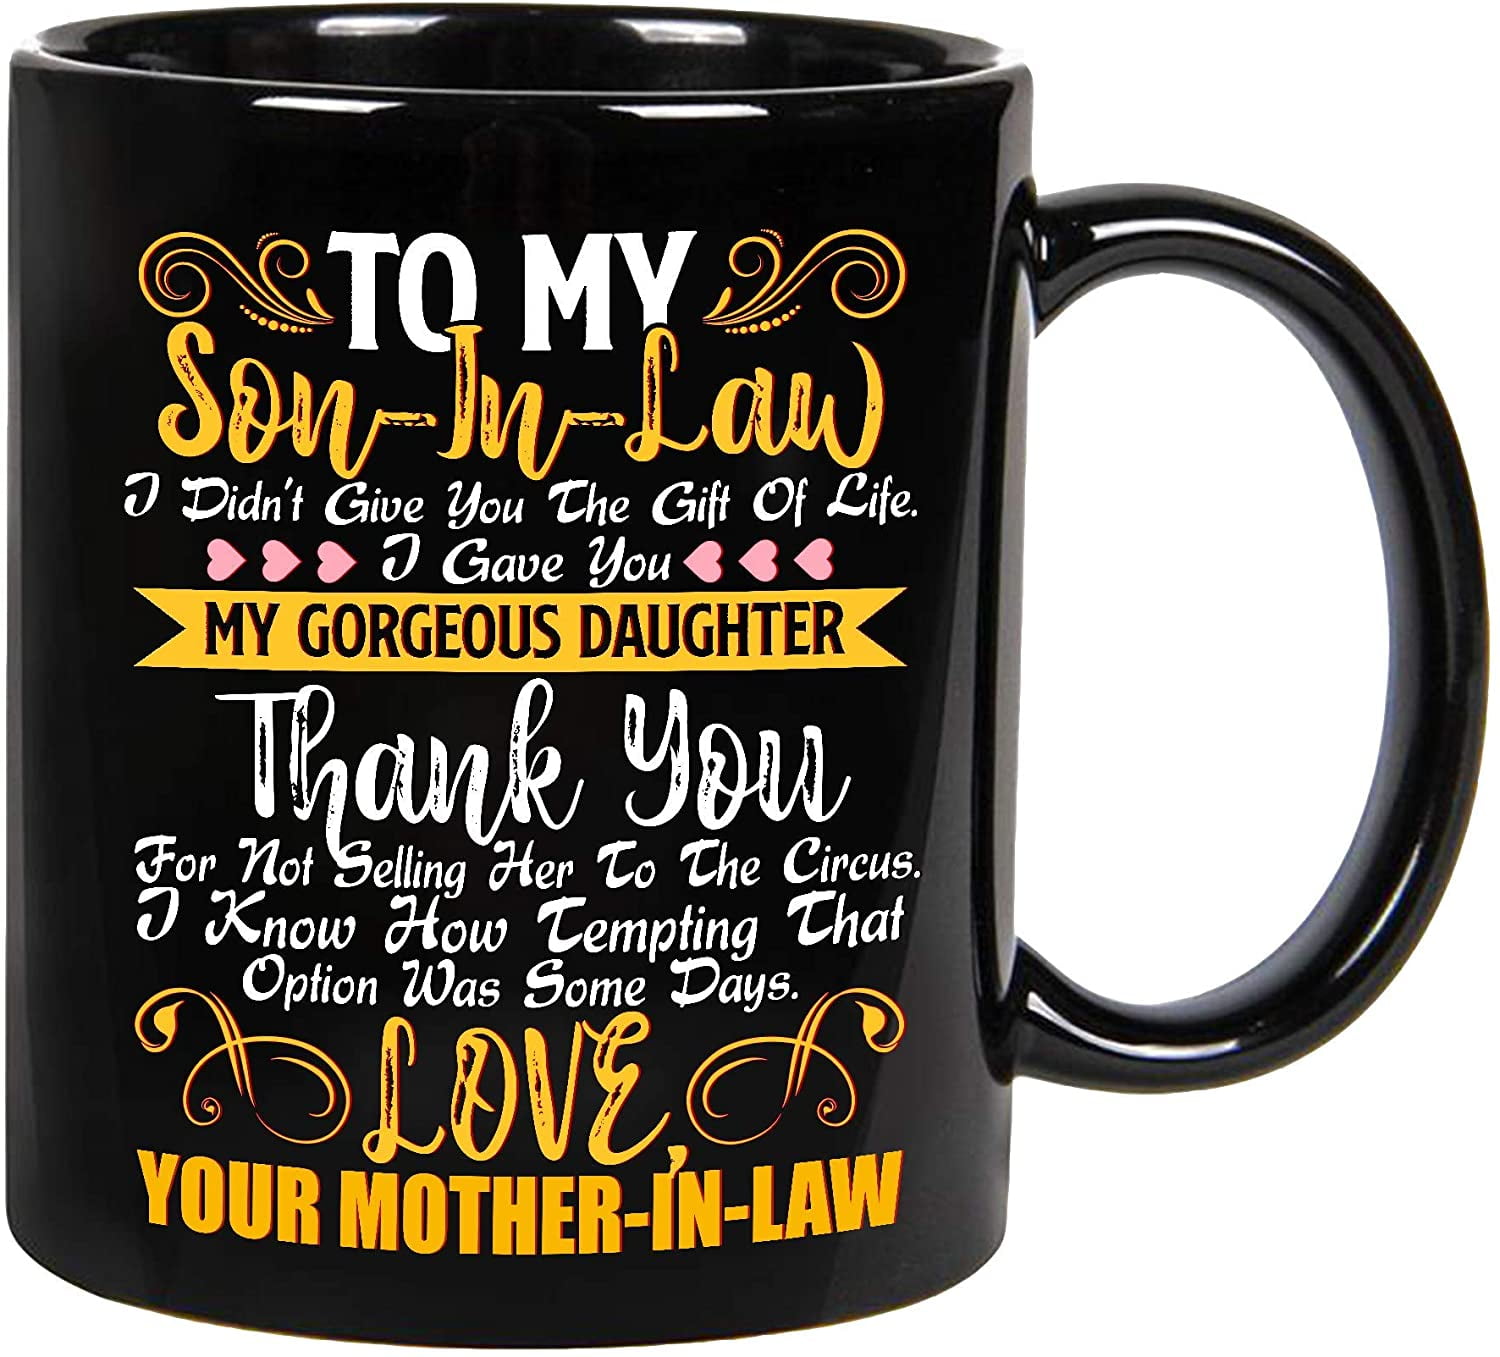 Son-in-law coffee cup/ Gift of life cup/ Son-in-law I gave You